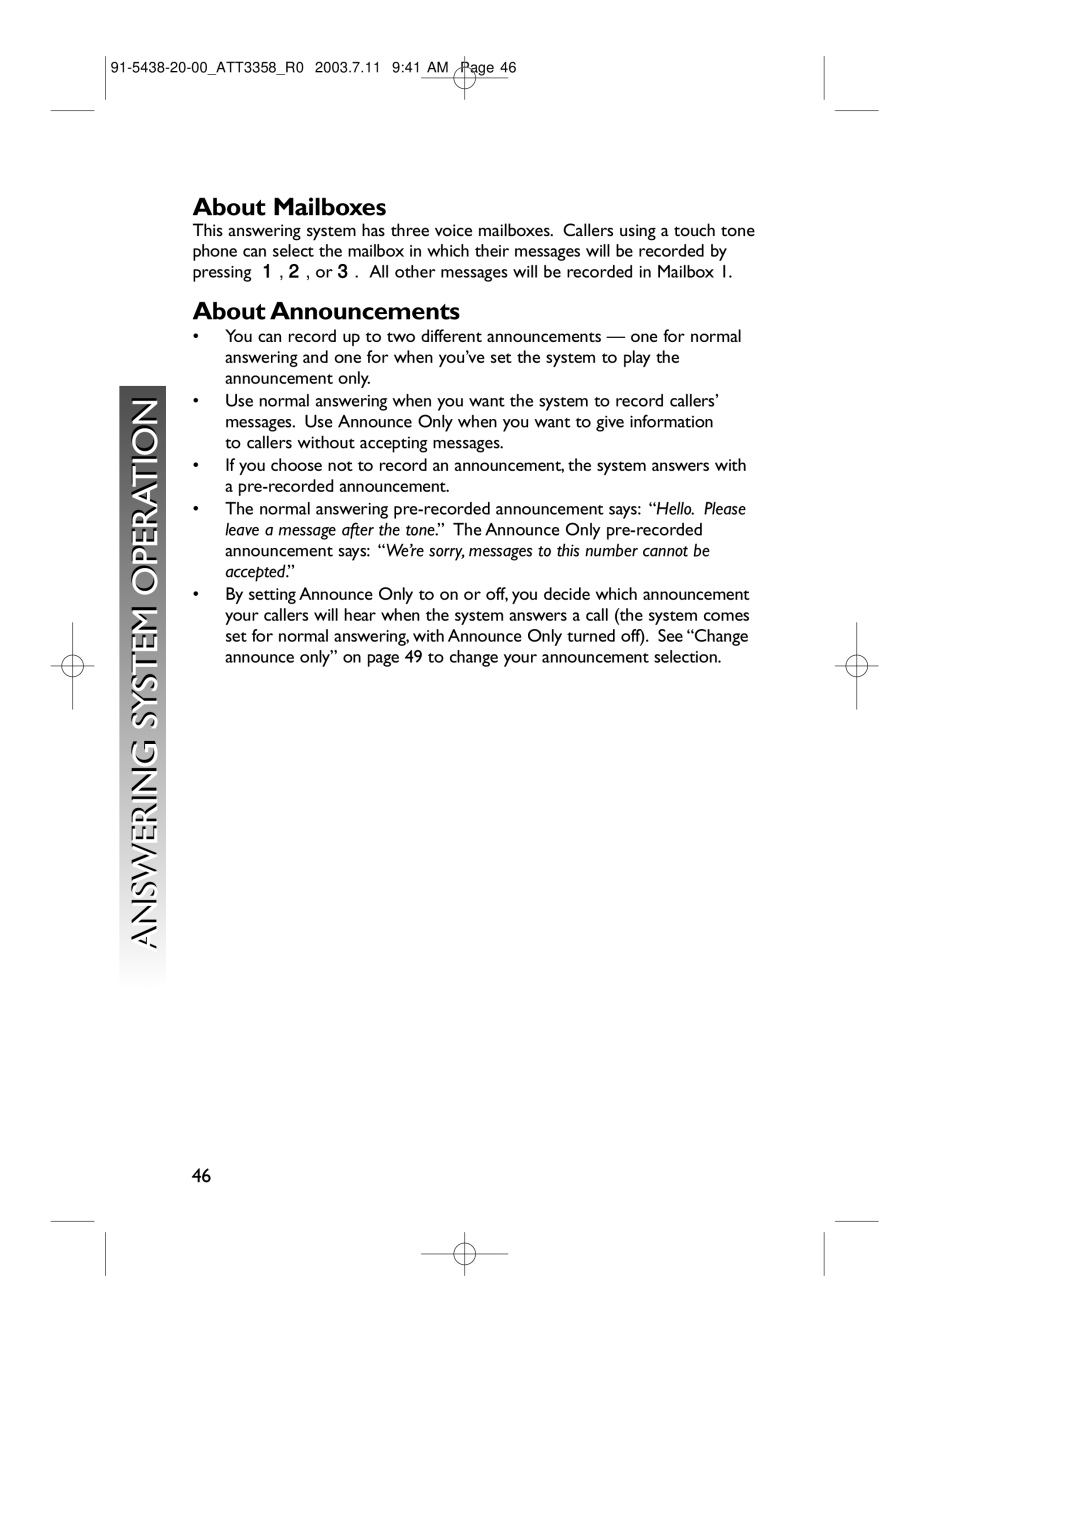 AT&T 3358 user manual Answering System Operation, About Mailboxes, About Announcements 